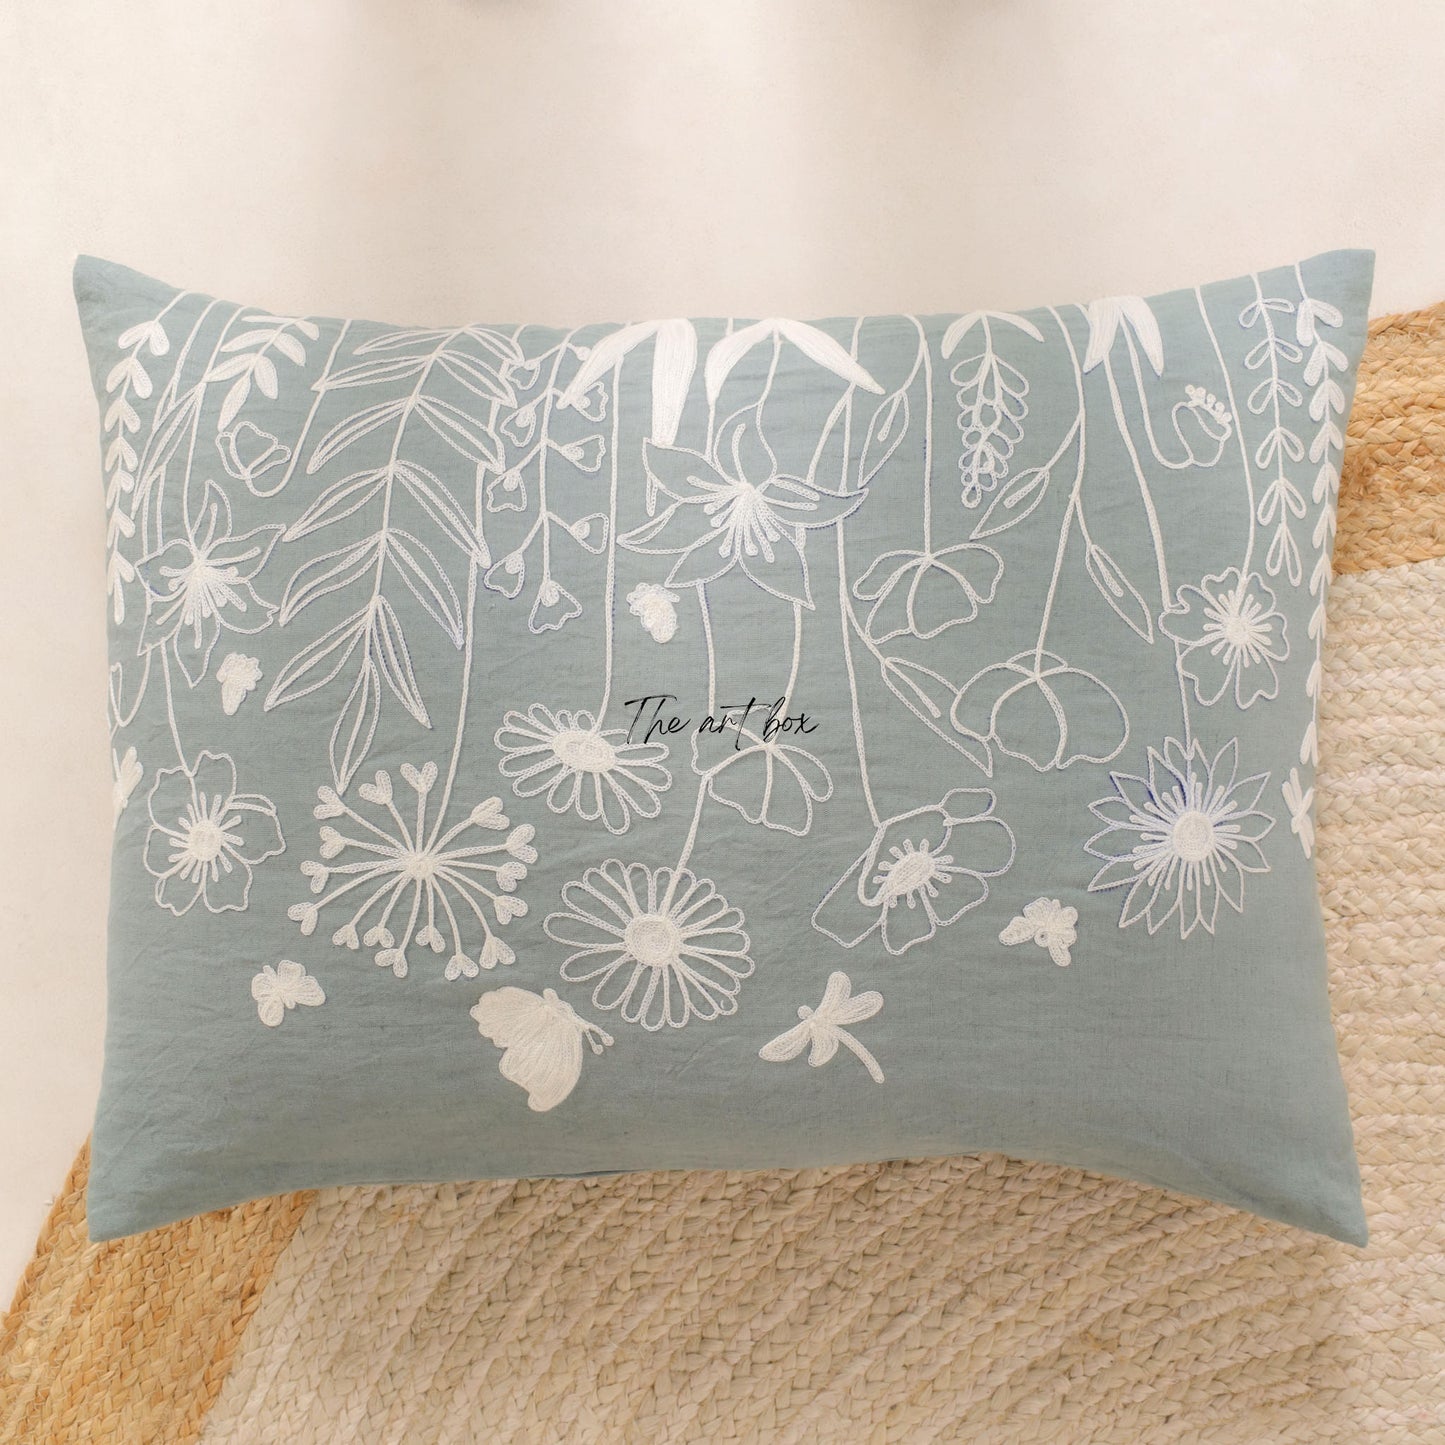 Customized Floral Embroidery Cushion - Make Your Space Bloom